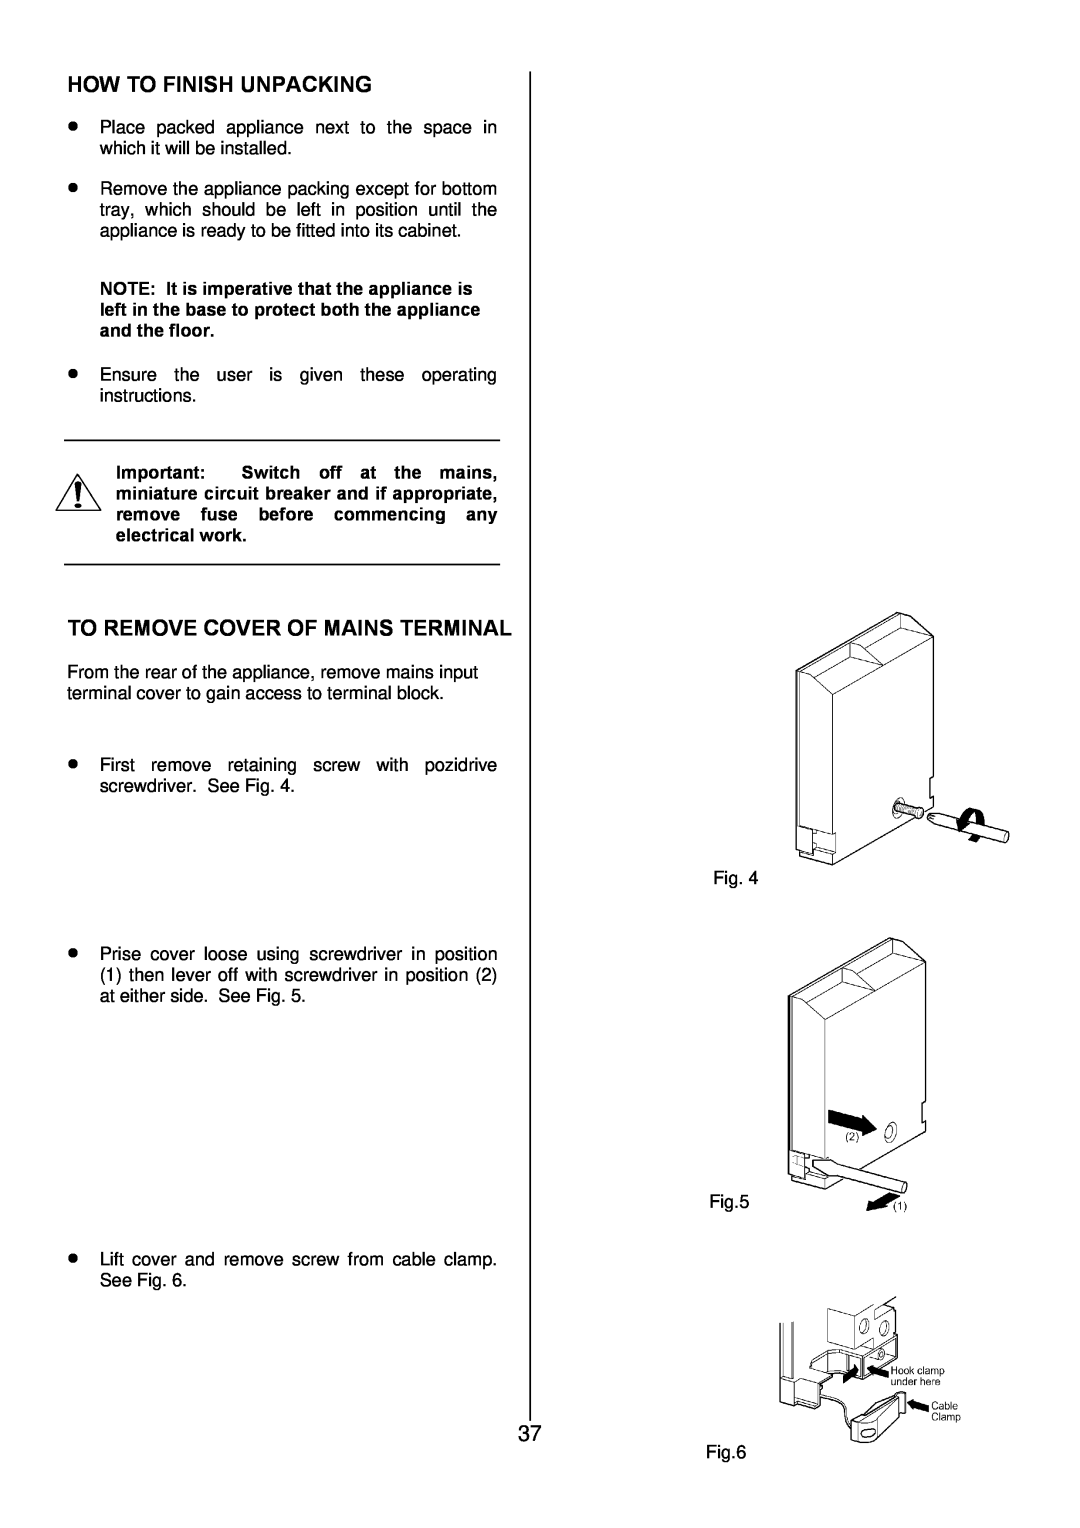 Zanussi ZOD 890 manual How To Finish Unpacking, To Remove Cover Of Mains Terminal 